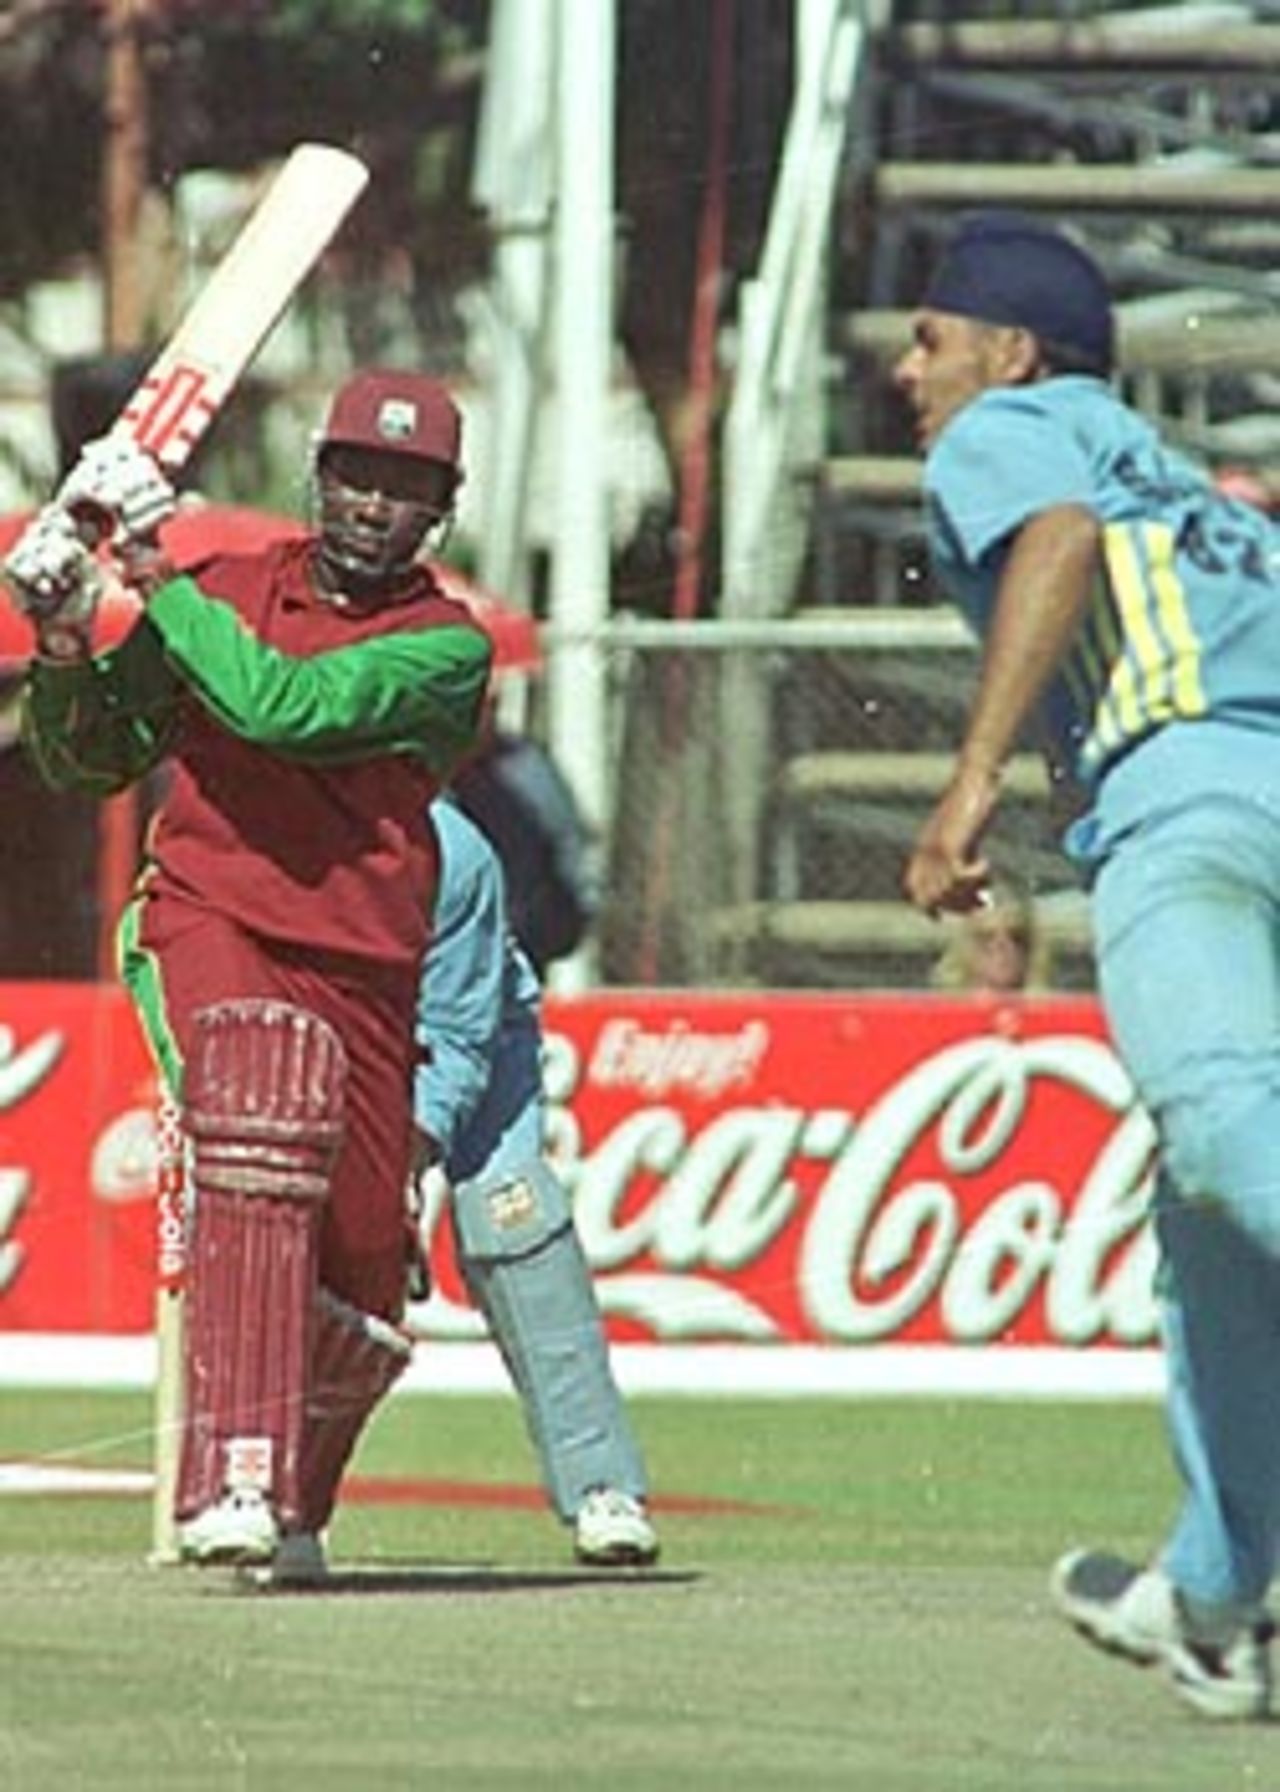 04 July 2001: Coca-Cola Cup (Zimbabwe) 2001, 6th Match, India v West Indies, Harare Sports Club